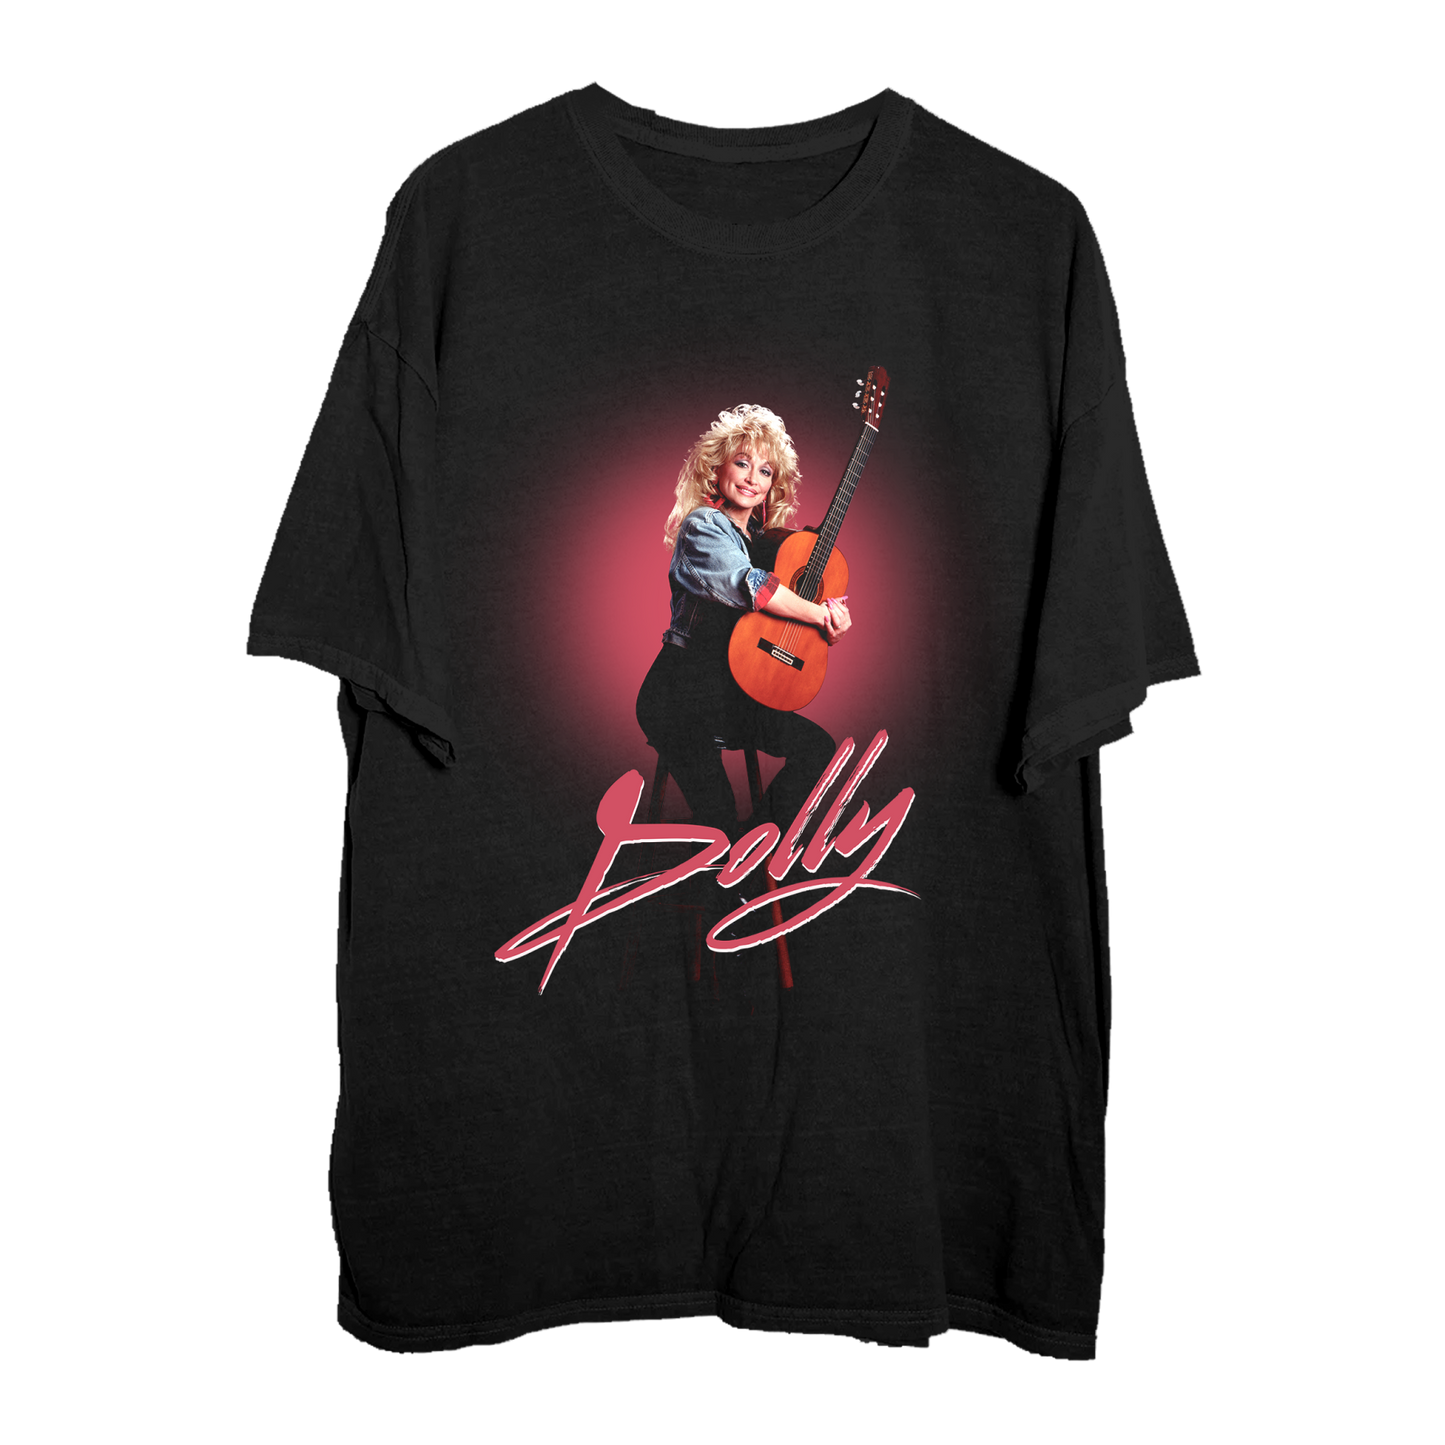 Official Dolly Parton Merchandise. 100% black premium cotton t-shirt with a photo of Dolly Parton sitting on a stool with an acoustic guitar and a red 80's rock and roll inspired Dolly script logo across the bottom.